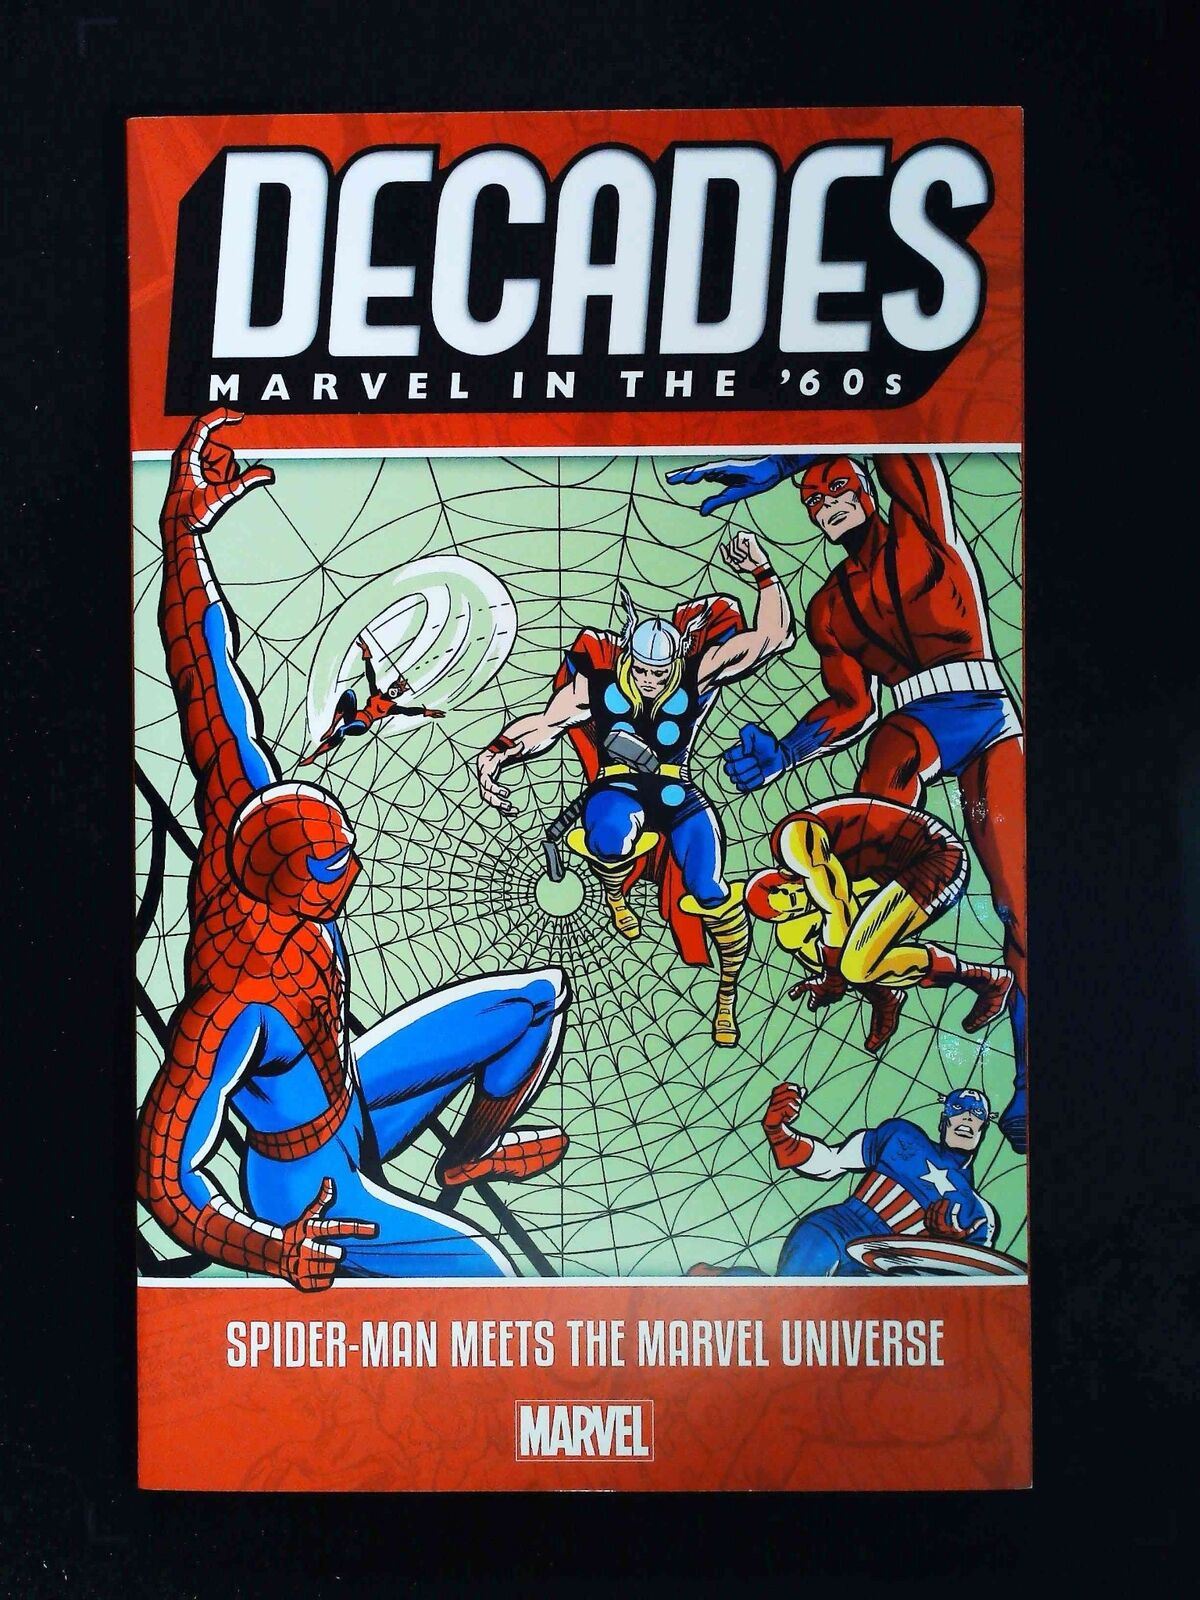 Decades Marvel In The '60S:Spider-Man Meets The Marvel Universe Tpb #1 2019 Nm+